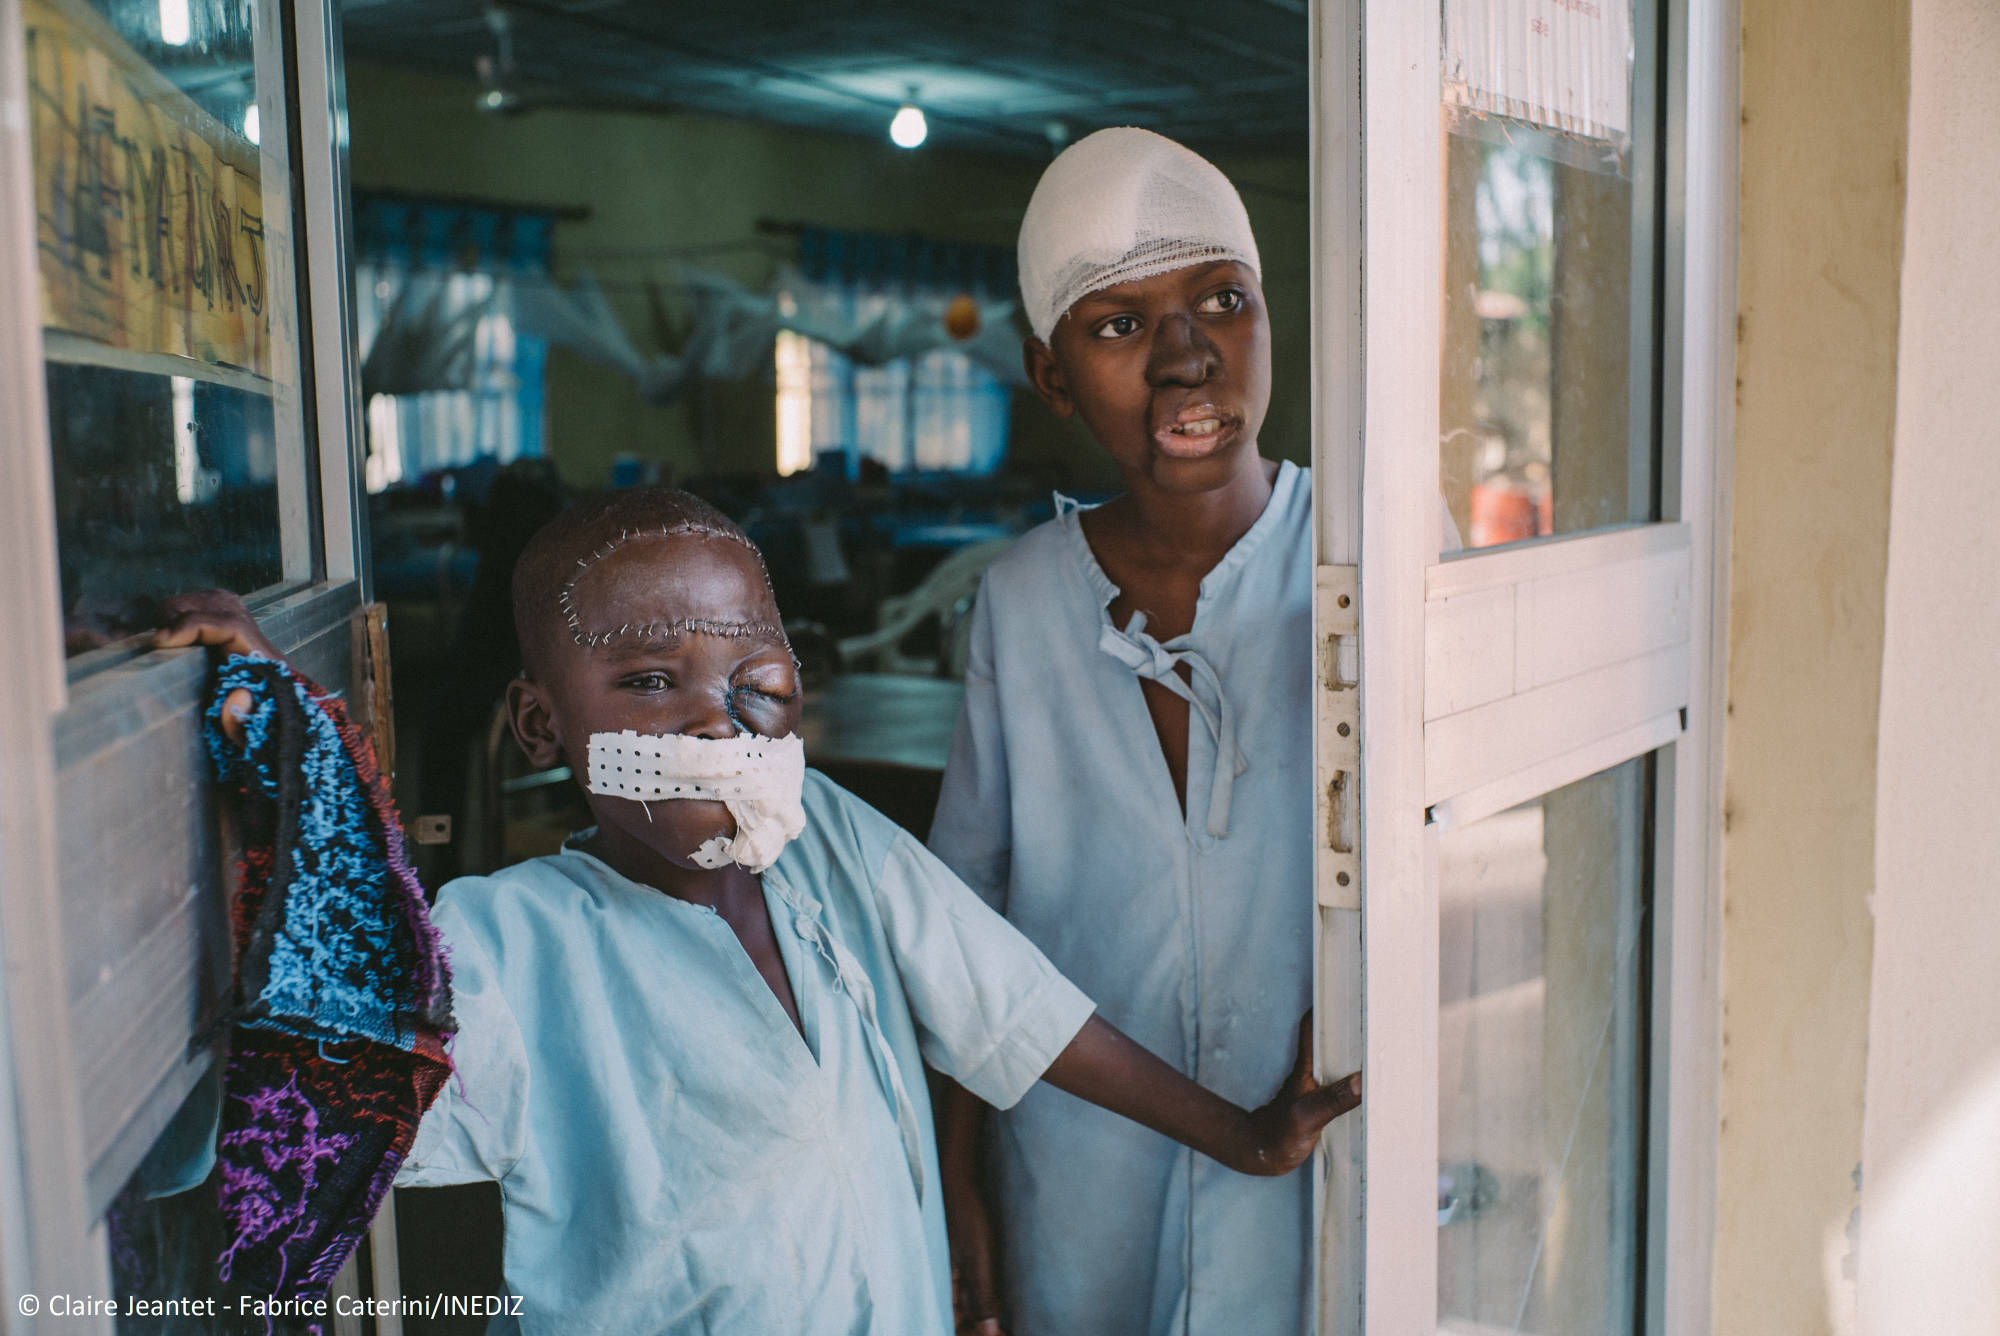 Umar, an eight-year-old noma patient from Kano state, and Adamu, a 15-year-old noma patient from Kebbi state, stand at the entrance of the post-operative ward at the Sokoto Noma Hospital. Photo by Claire Jeantet - Fabrice Caterini/INEDIZ.